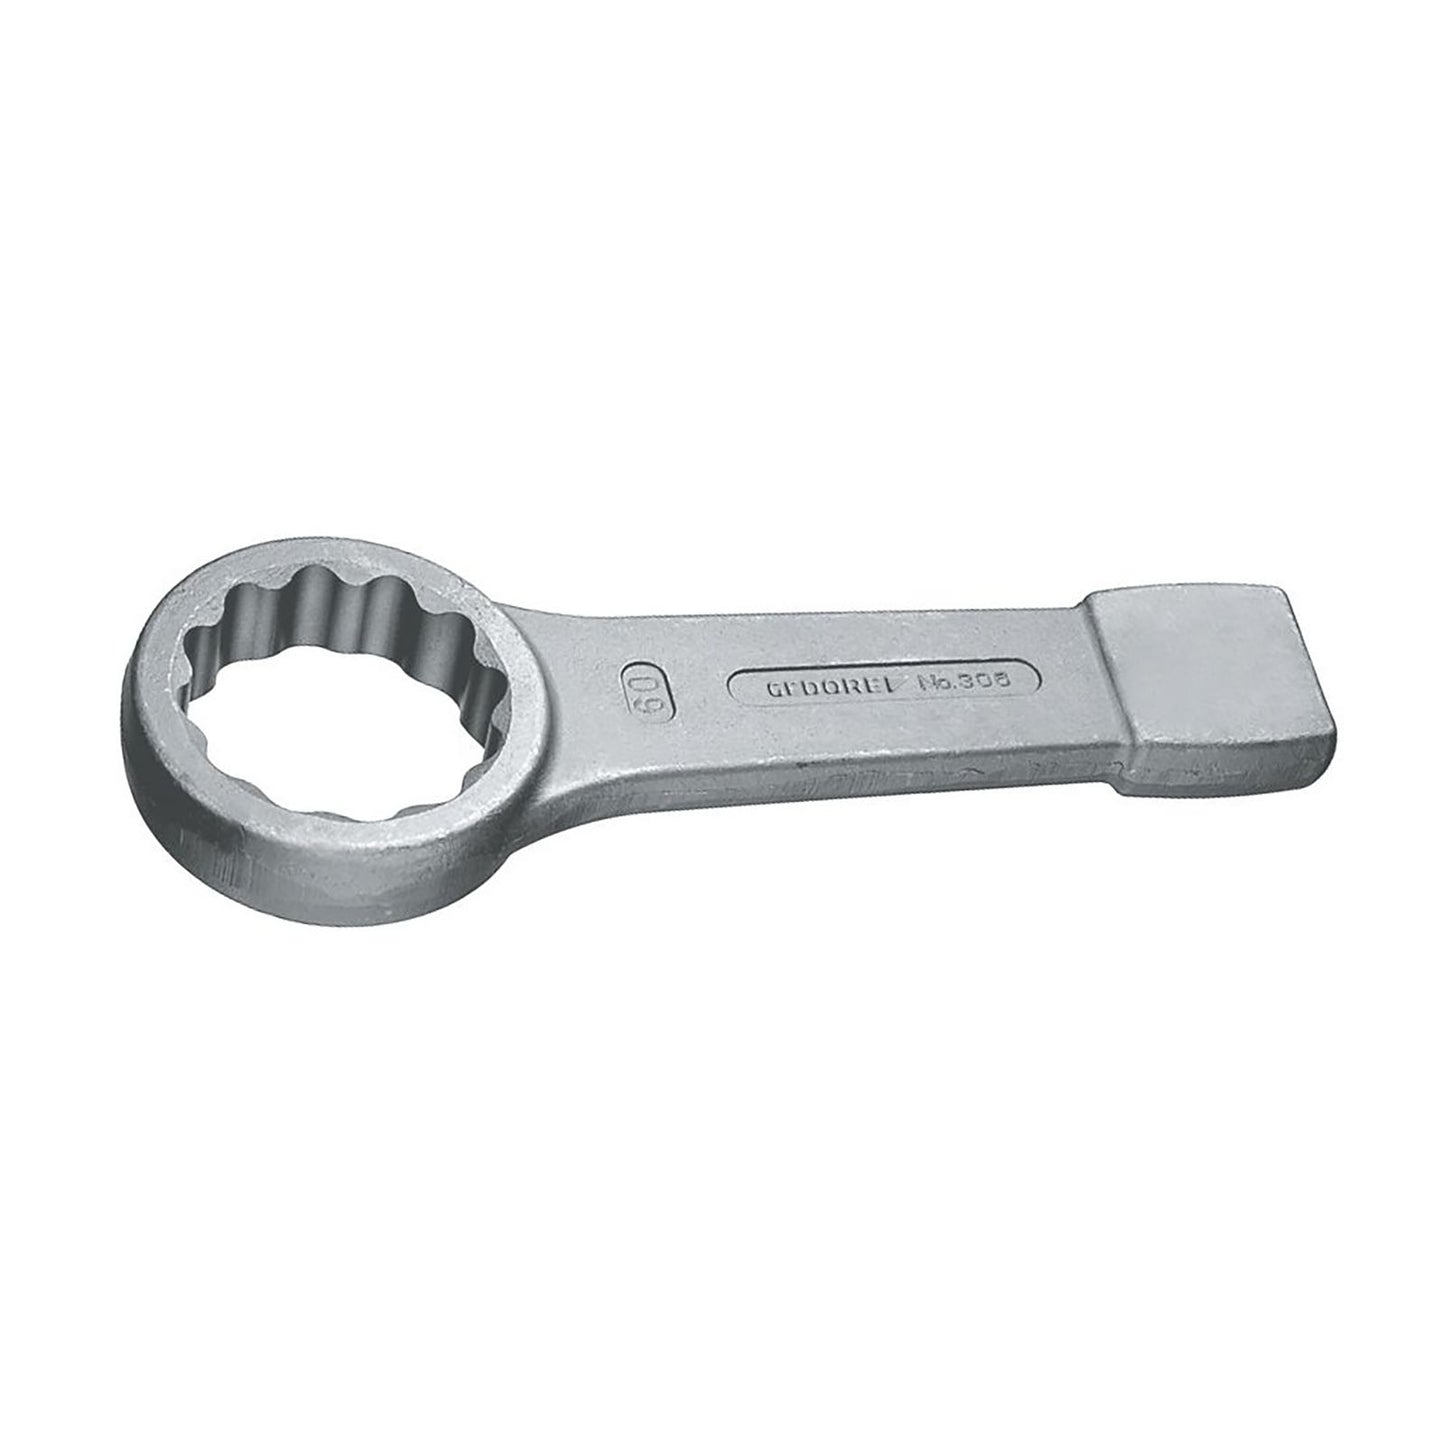 GEDORE 306 135 - Closed Strike Wrench, 135mm (6477640)